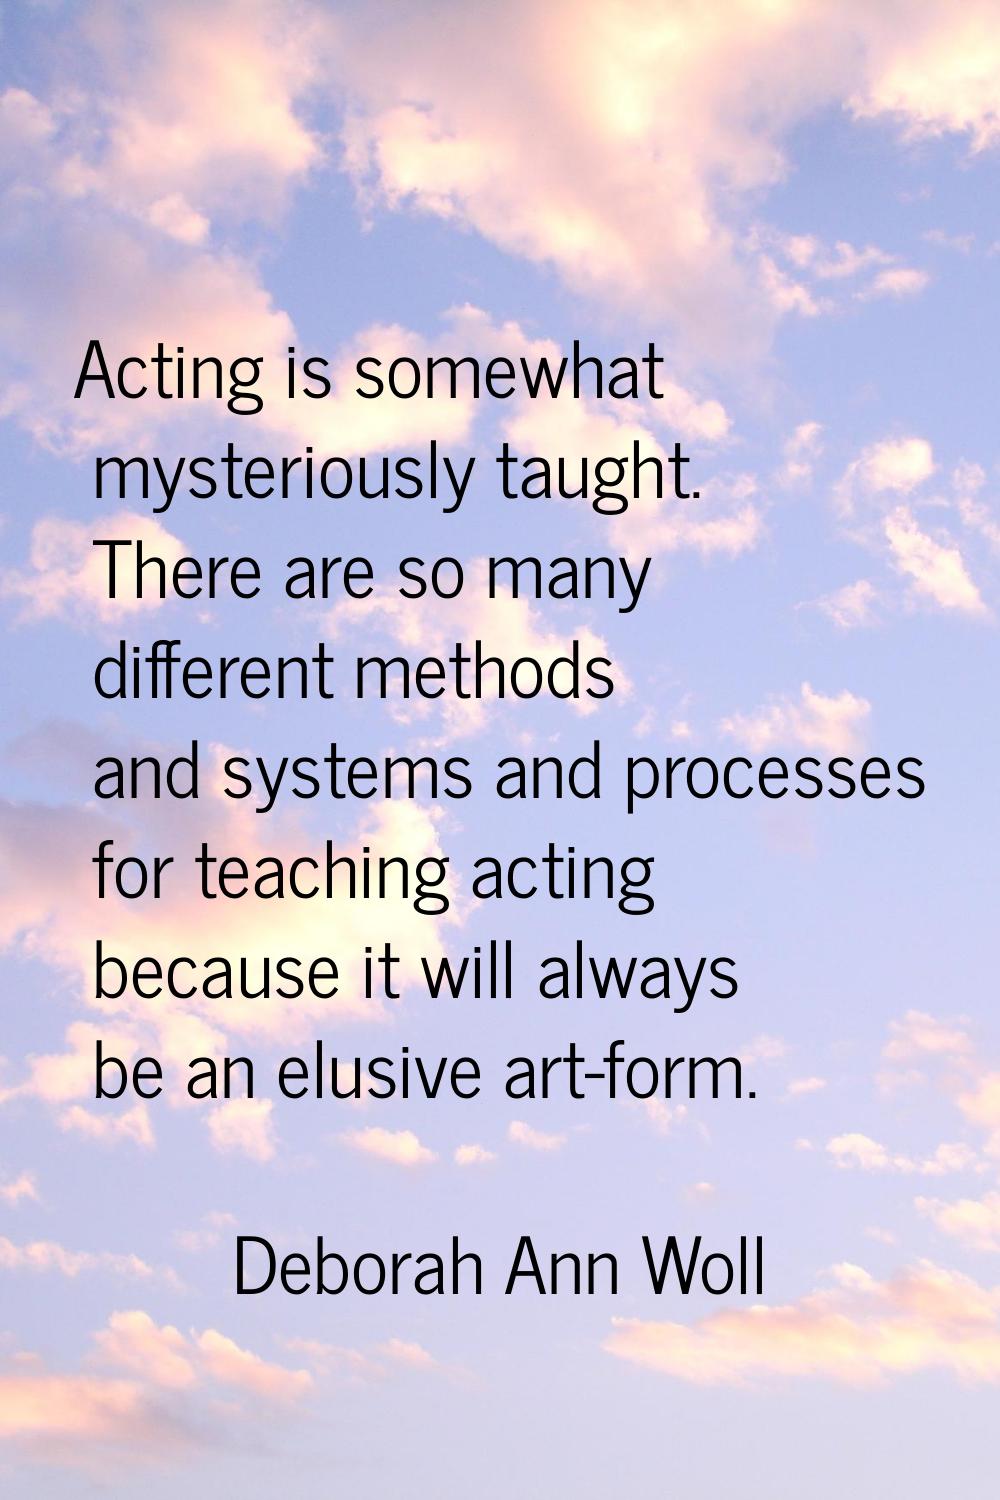 Acting is somewhat mysteriously taught. There are so many different methods and systems and process